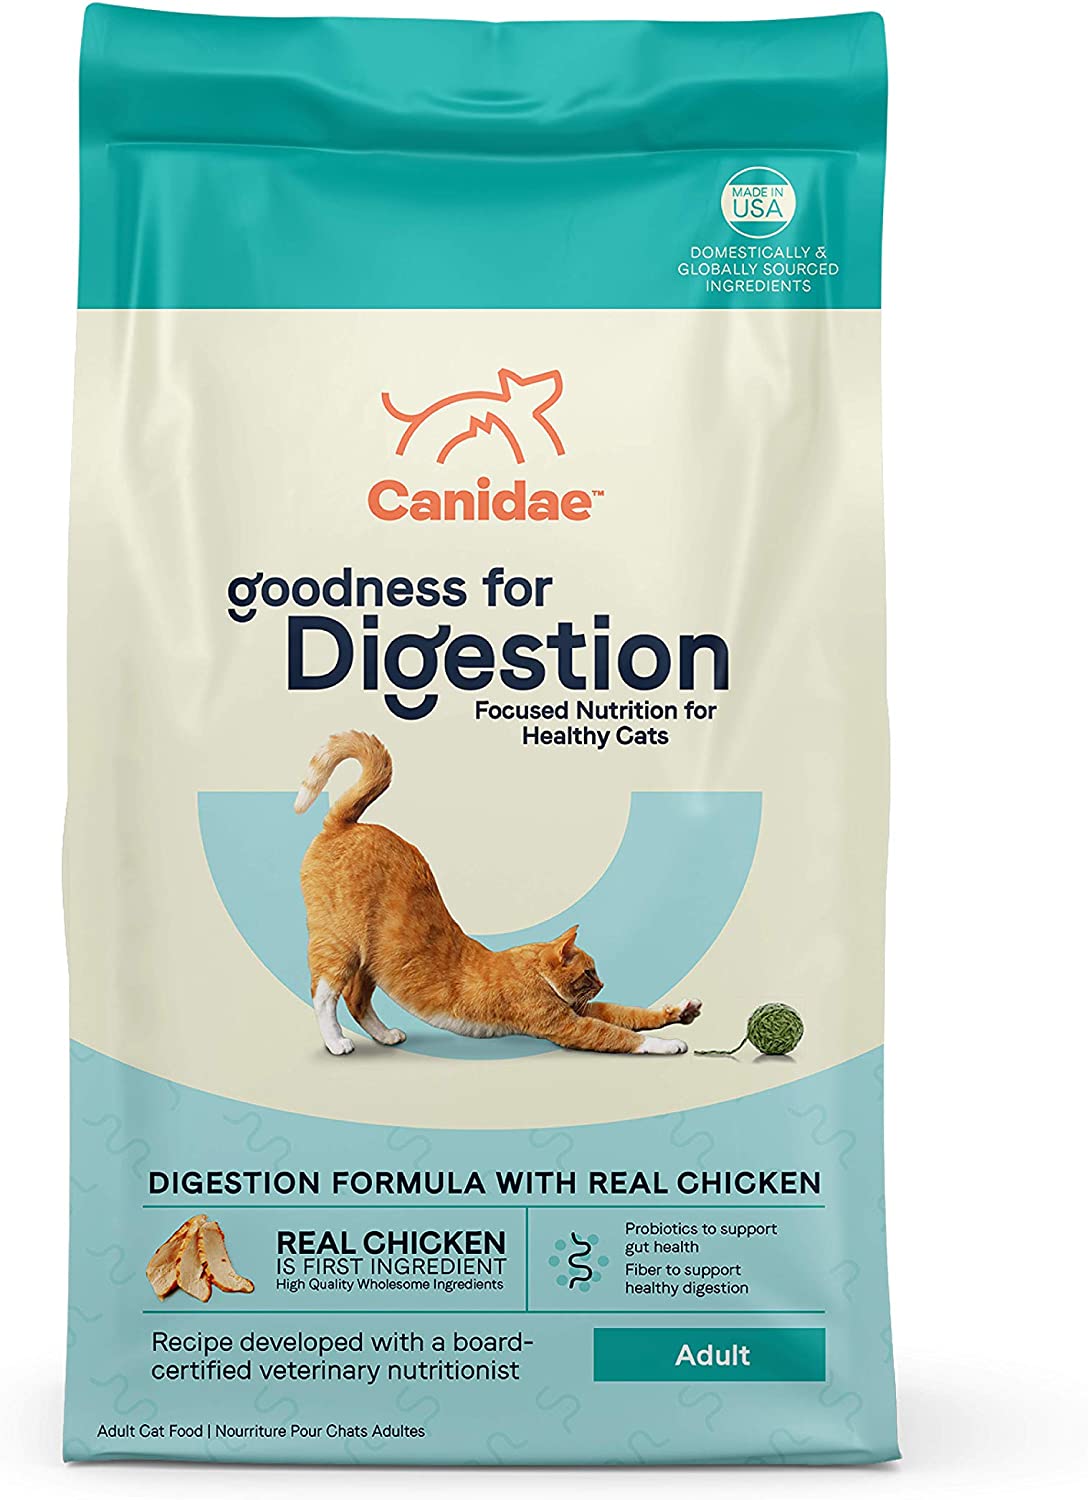 CANIDAE® Goodness Digestion Formula with Real Chicken, Dry Cat Food